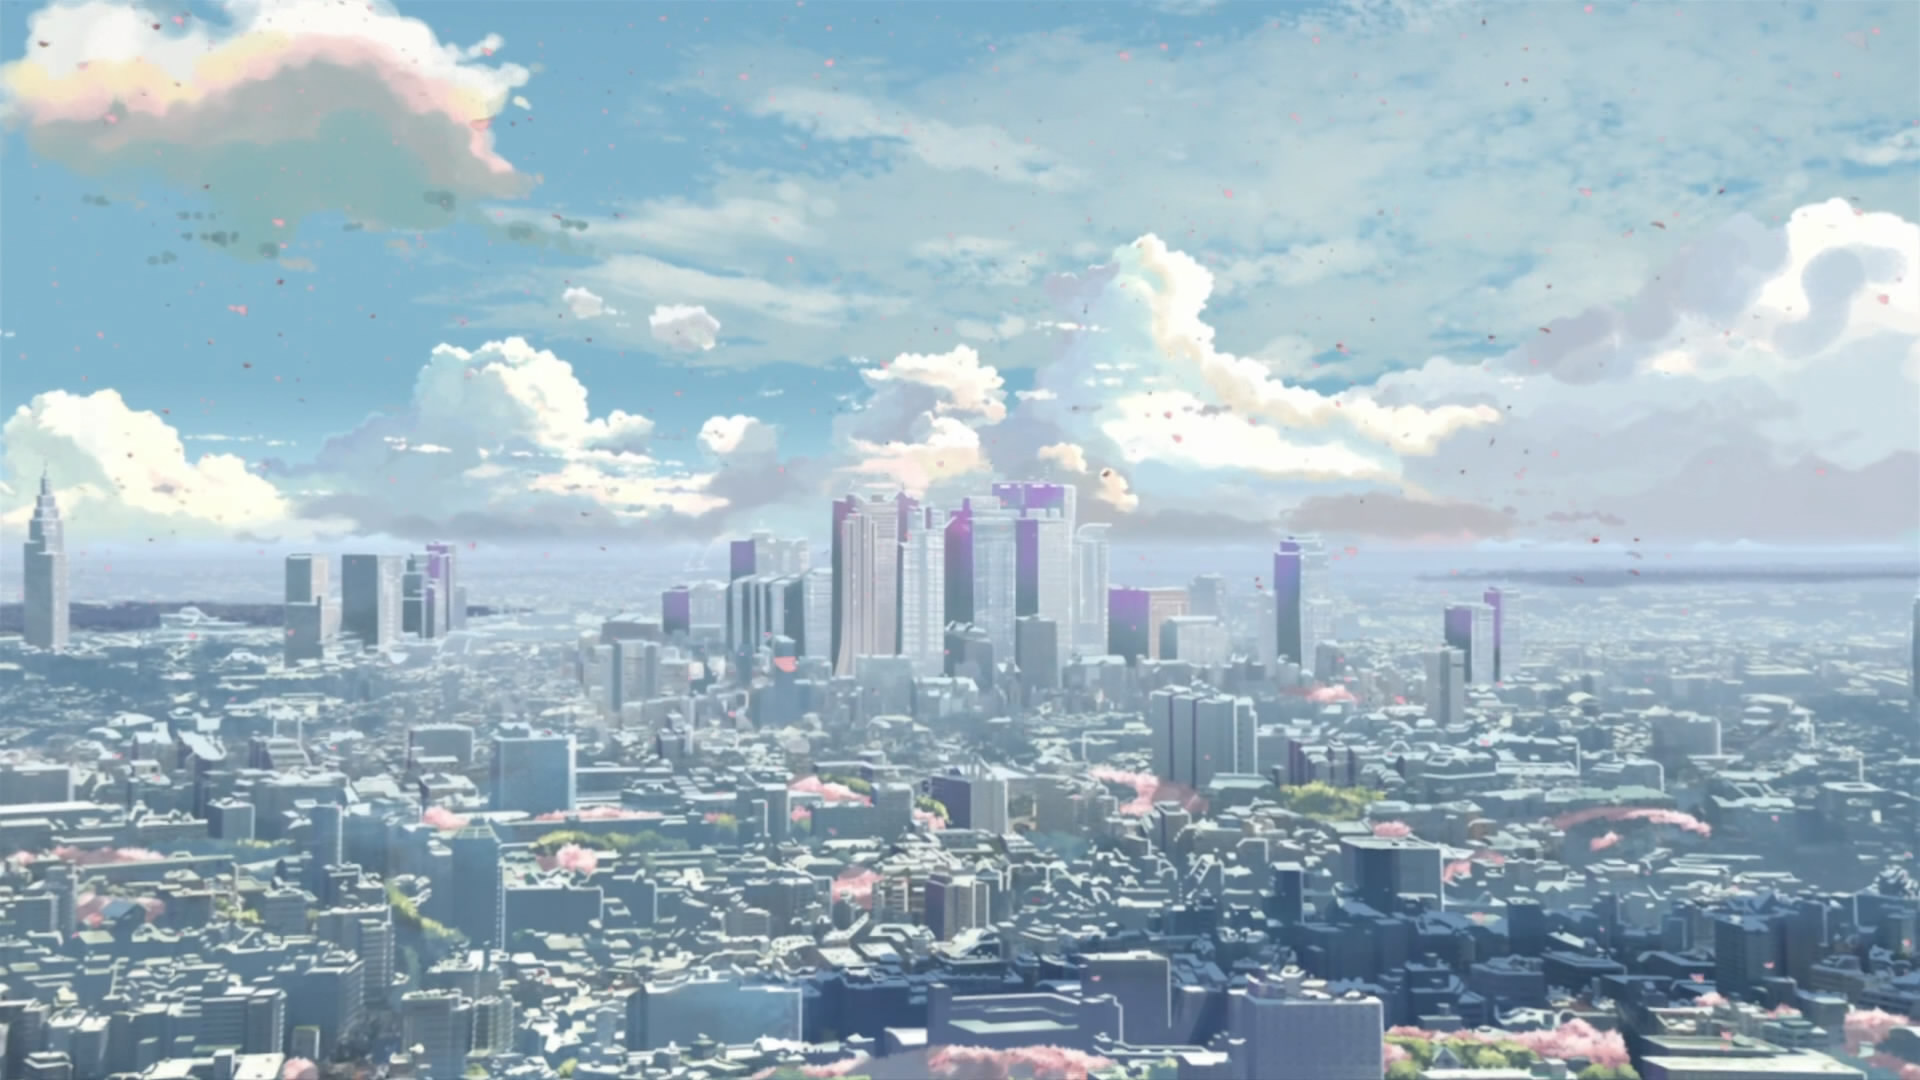 1920x1080 > 5 Centimeters Per Second Wallpapers